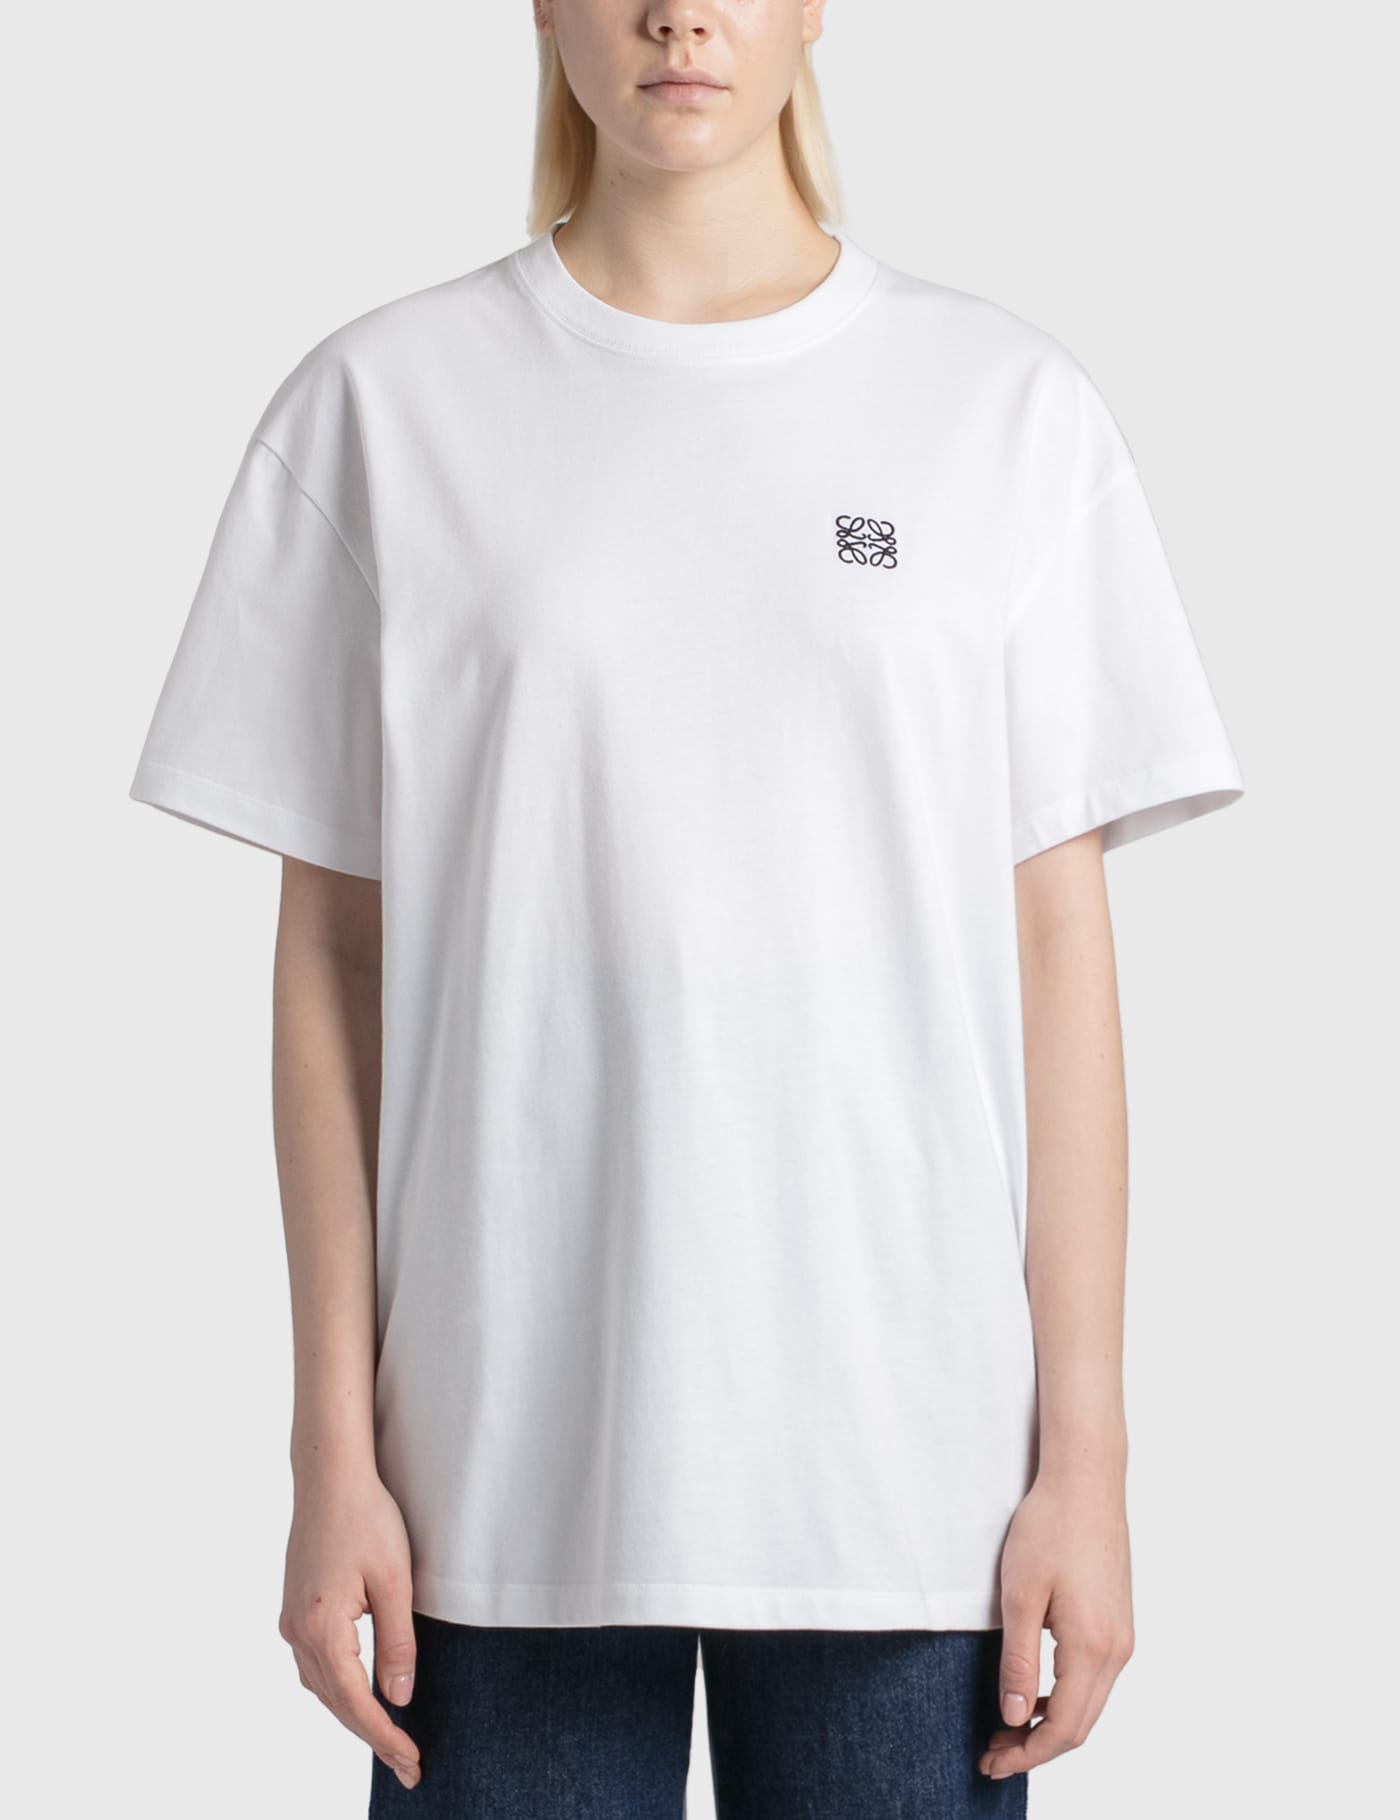 Loewe - Anagram T-shirt | HBX - Globally Curated Fashion and Lifestyle by  Hypebeast